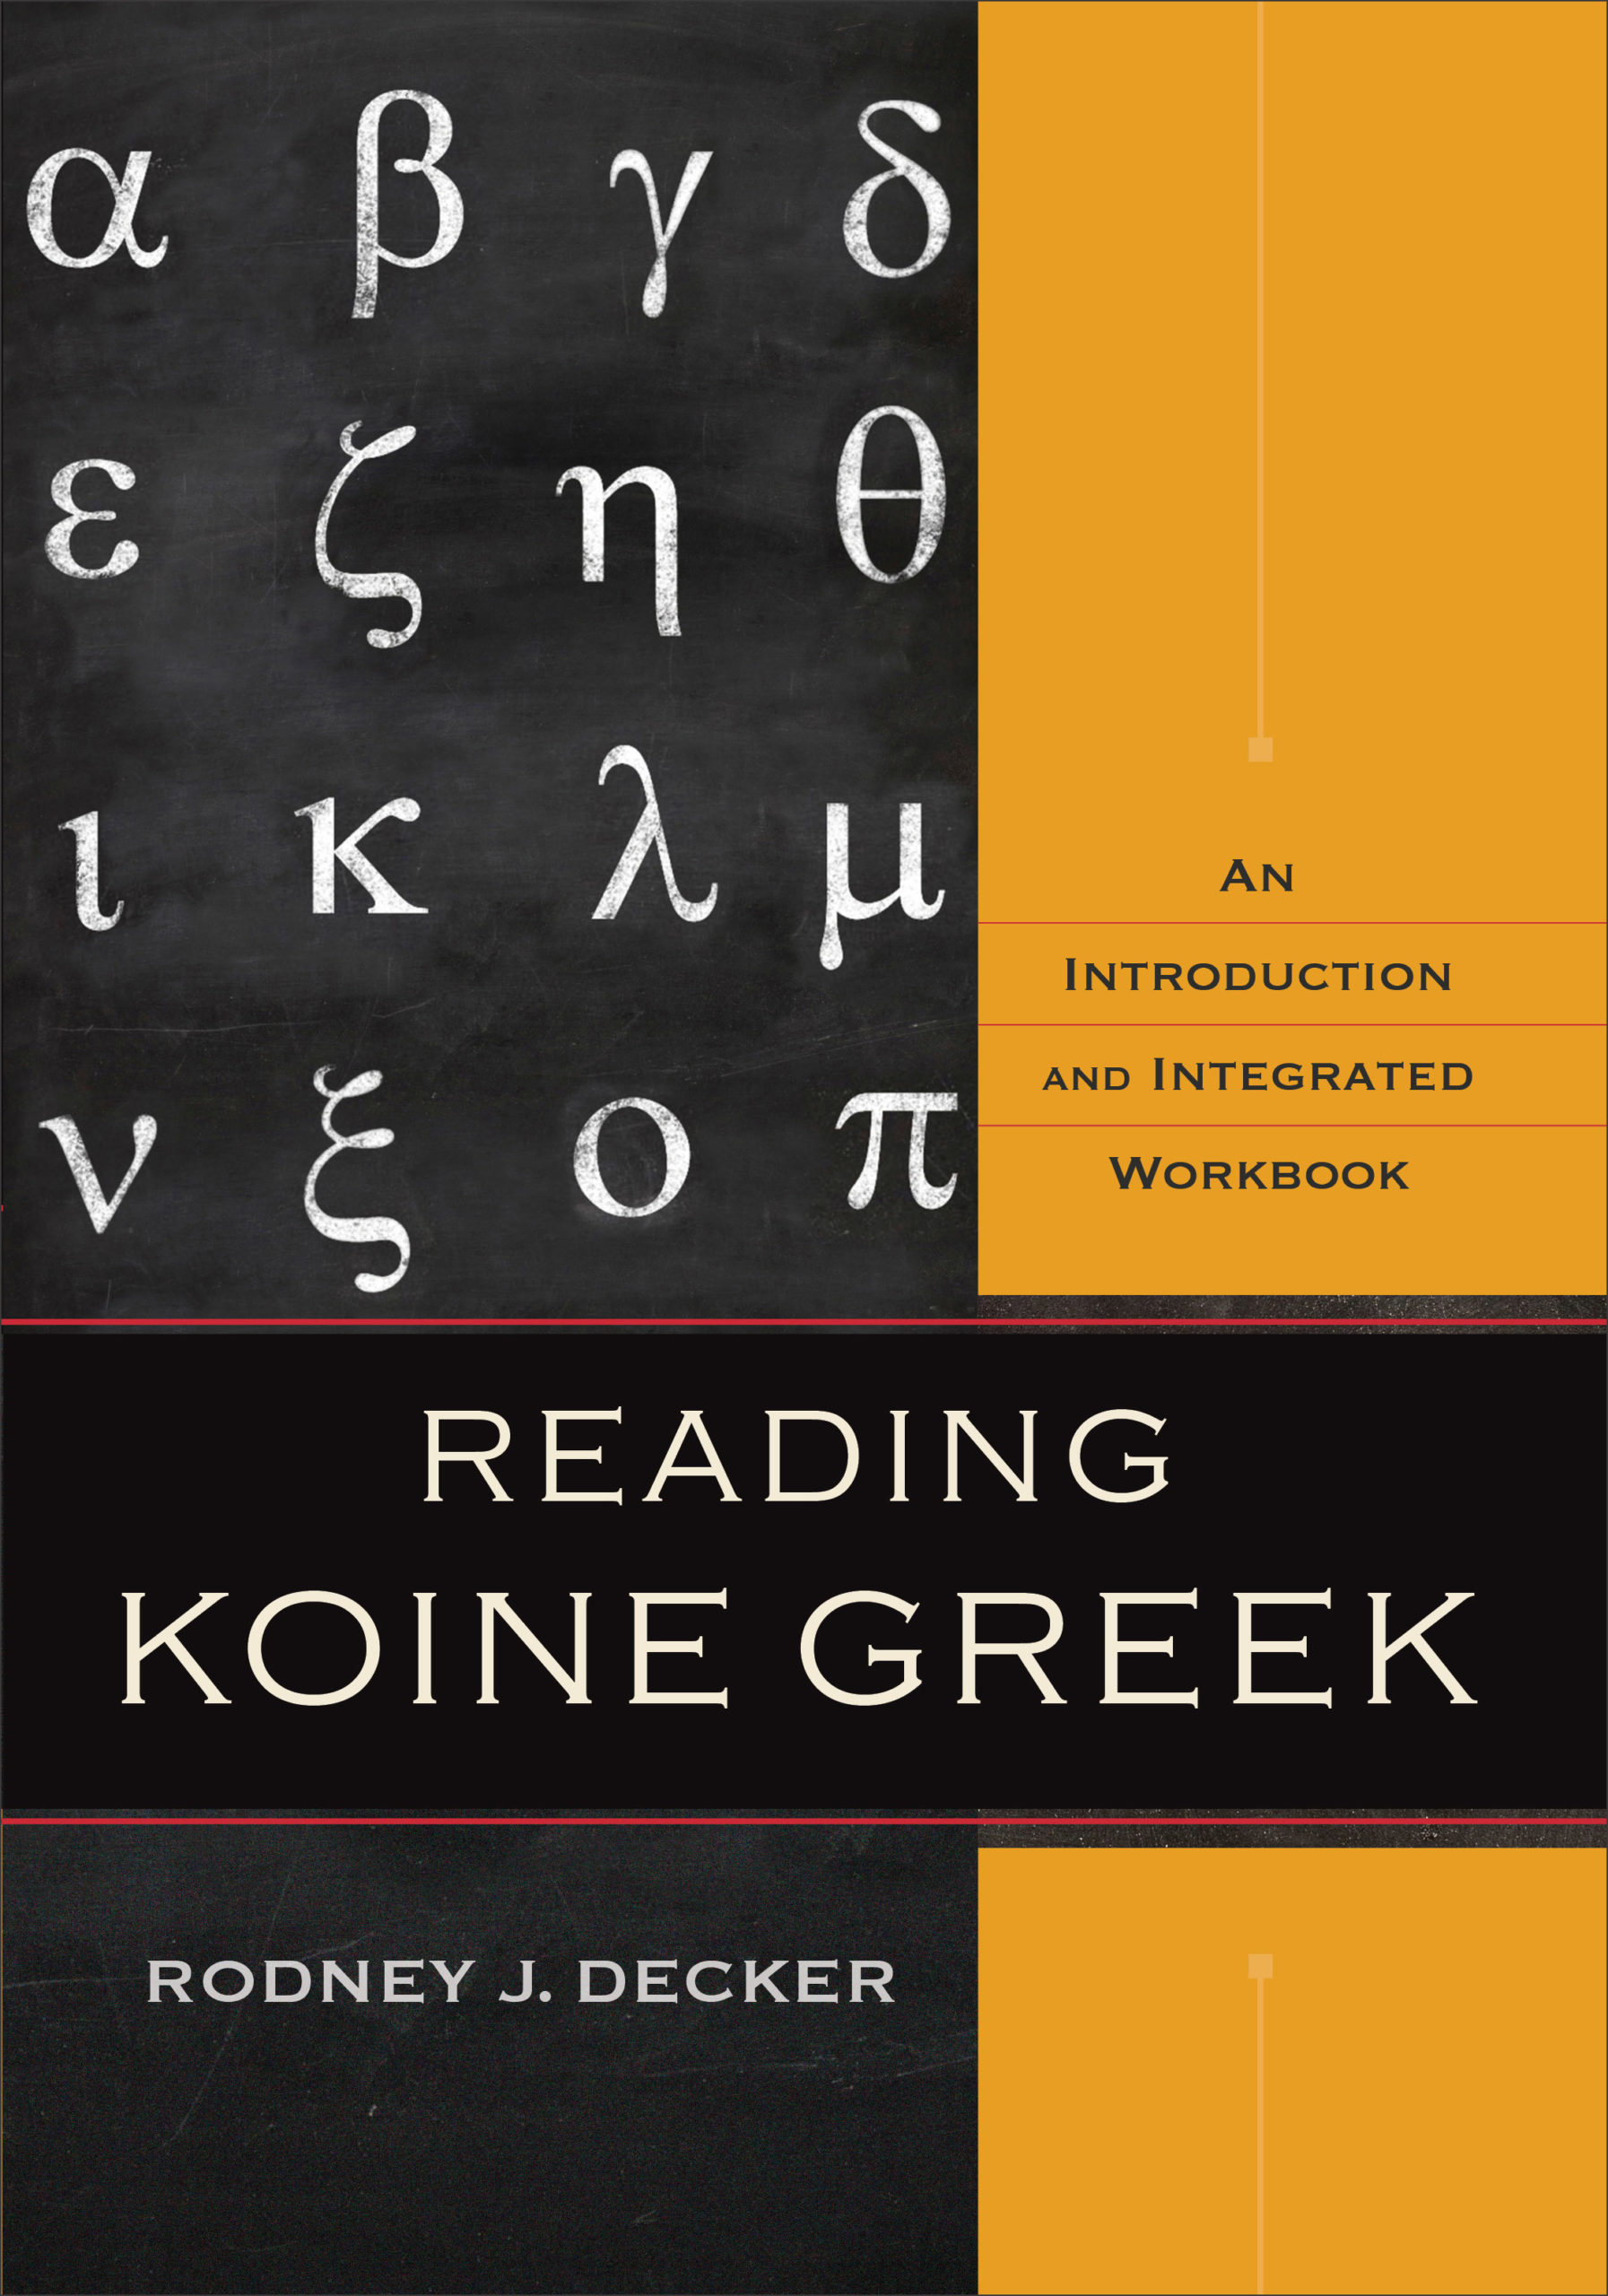 Reading Koine Greek: An Introduction and Integrated Workbook book cover